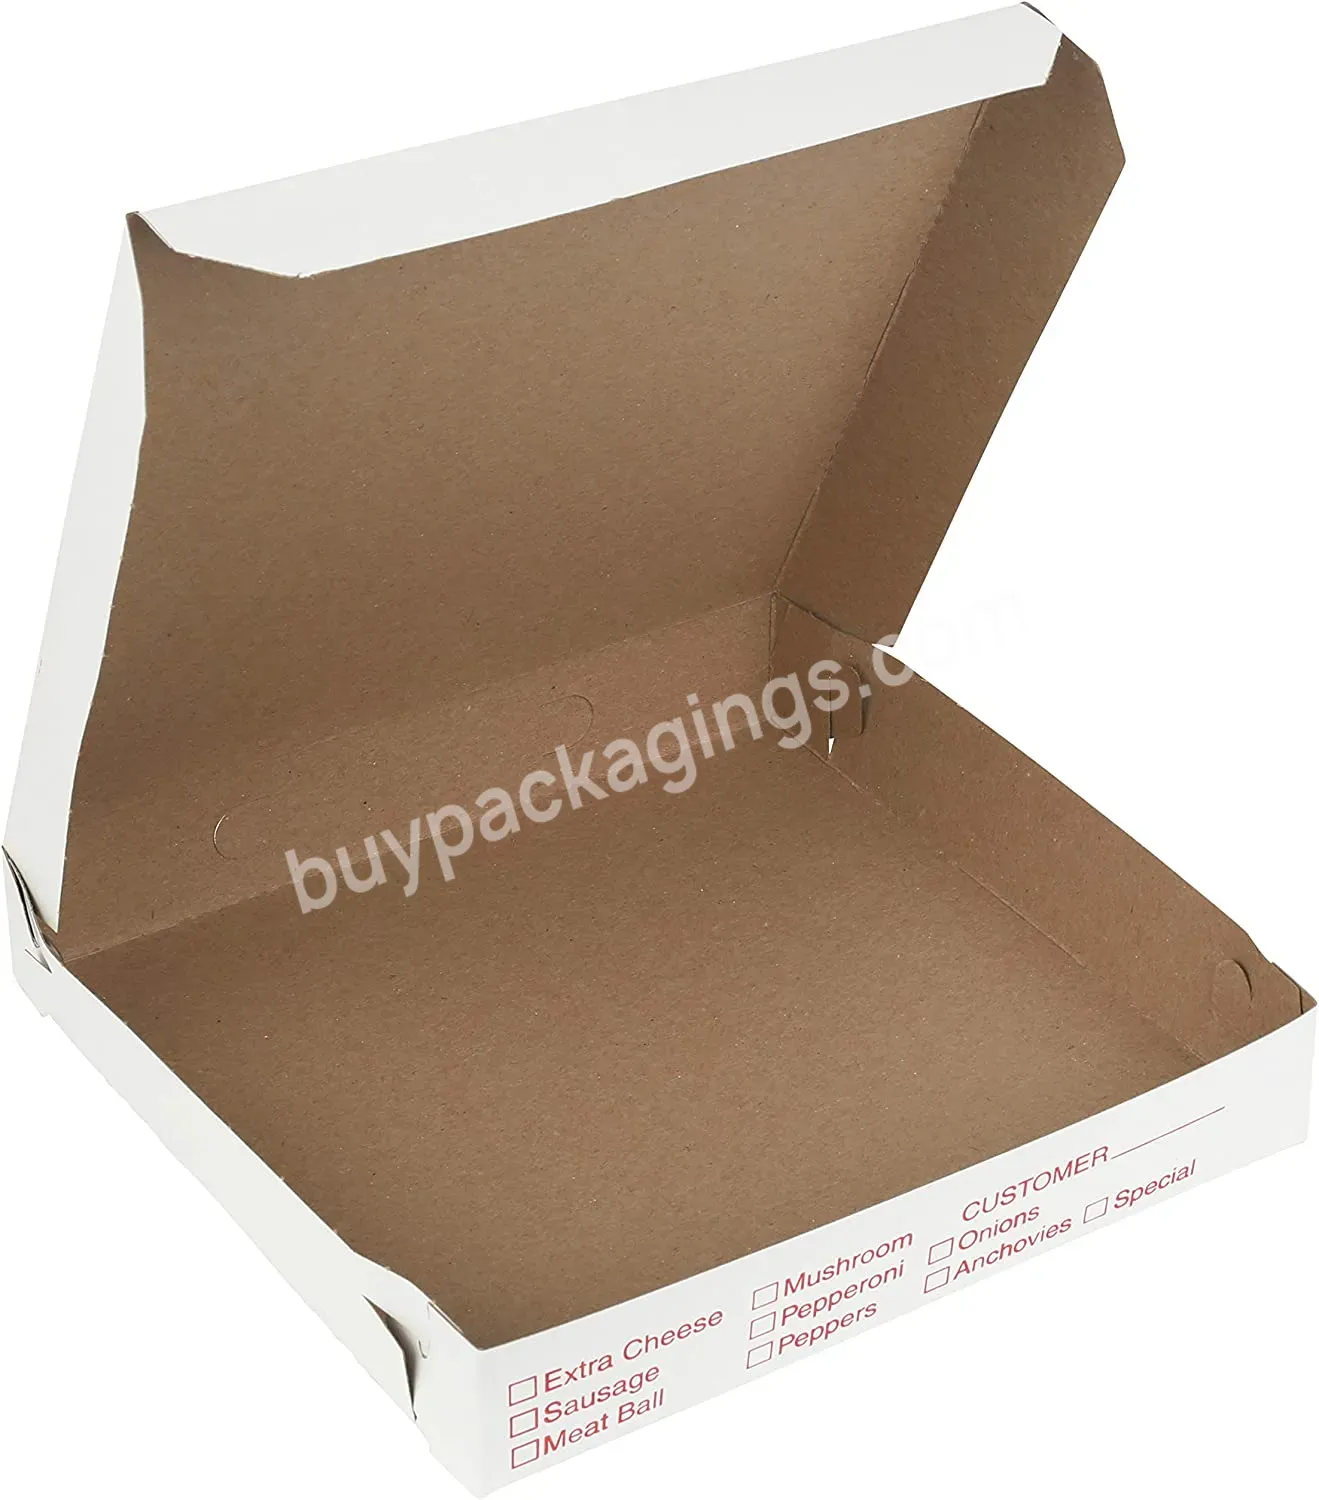 Shanghai Manufacturer Custom Printed Pizza Box Wholesale Pizza Paper Packing Box